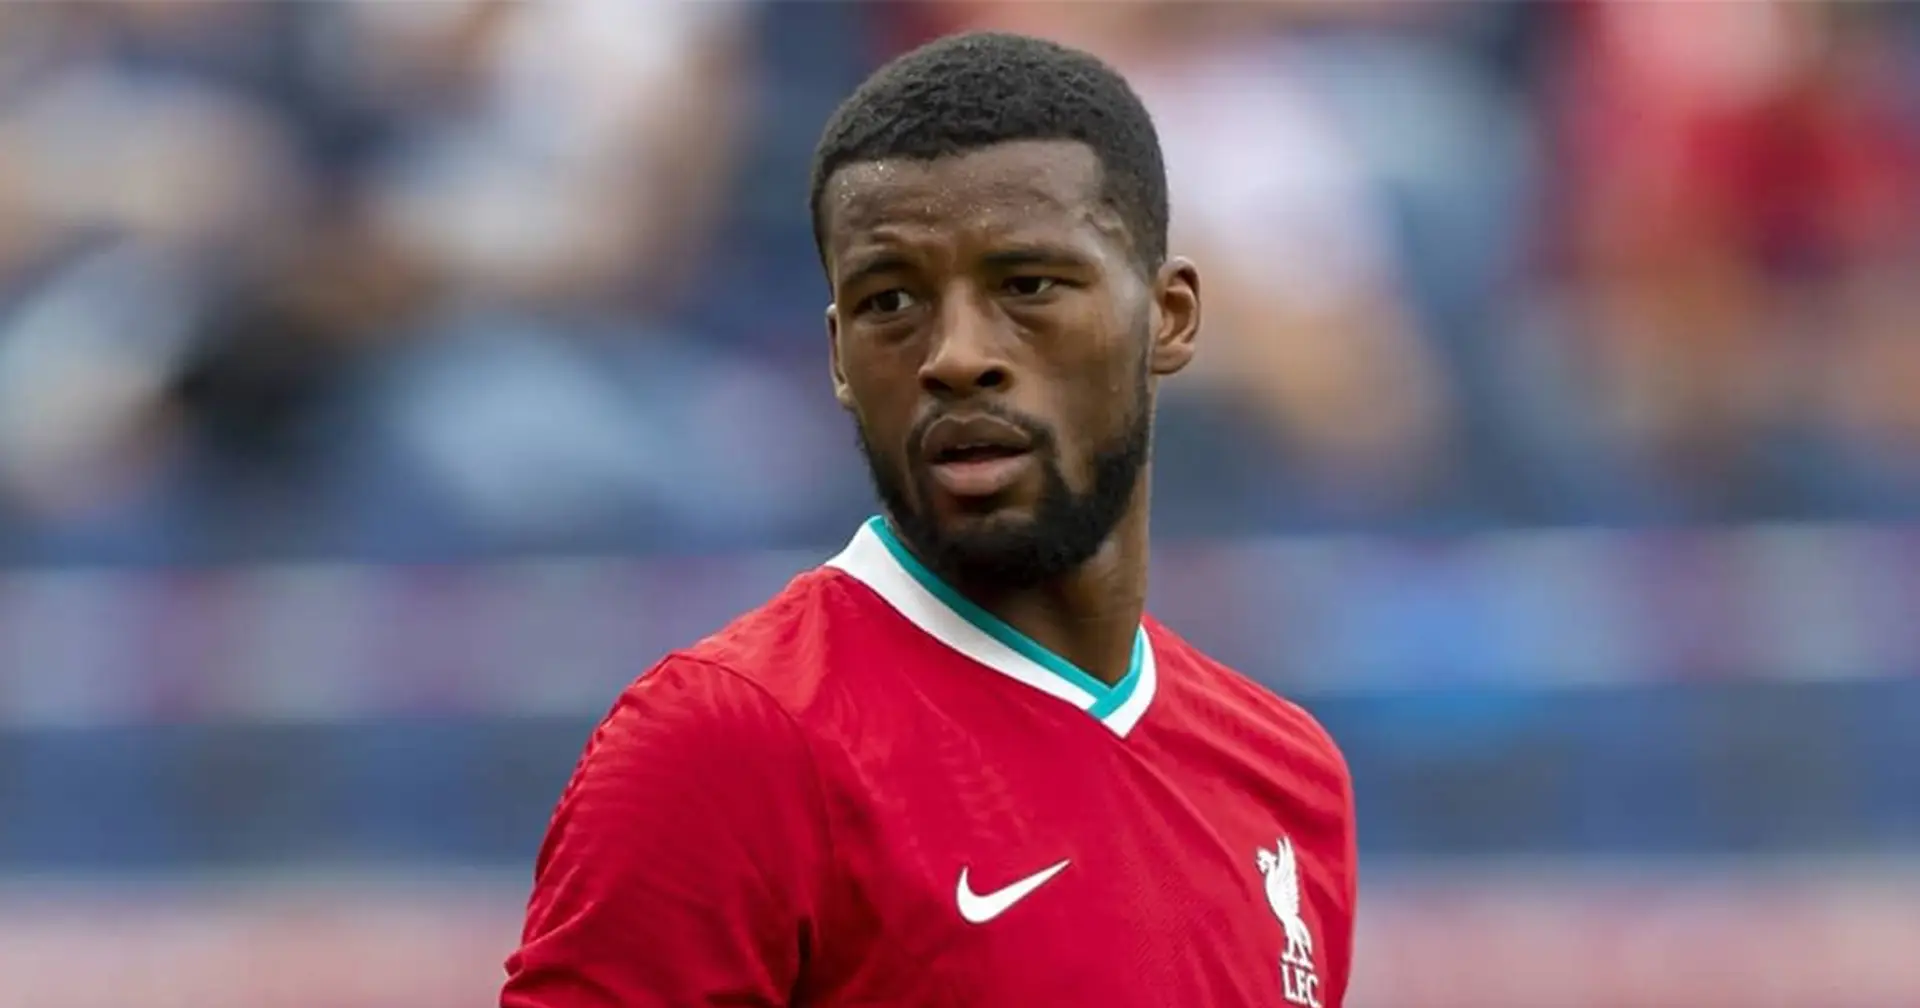 Wijnaldum 'has agreed a 3-year deal' with Barca; medicals could take place next Tuesday – top source